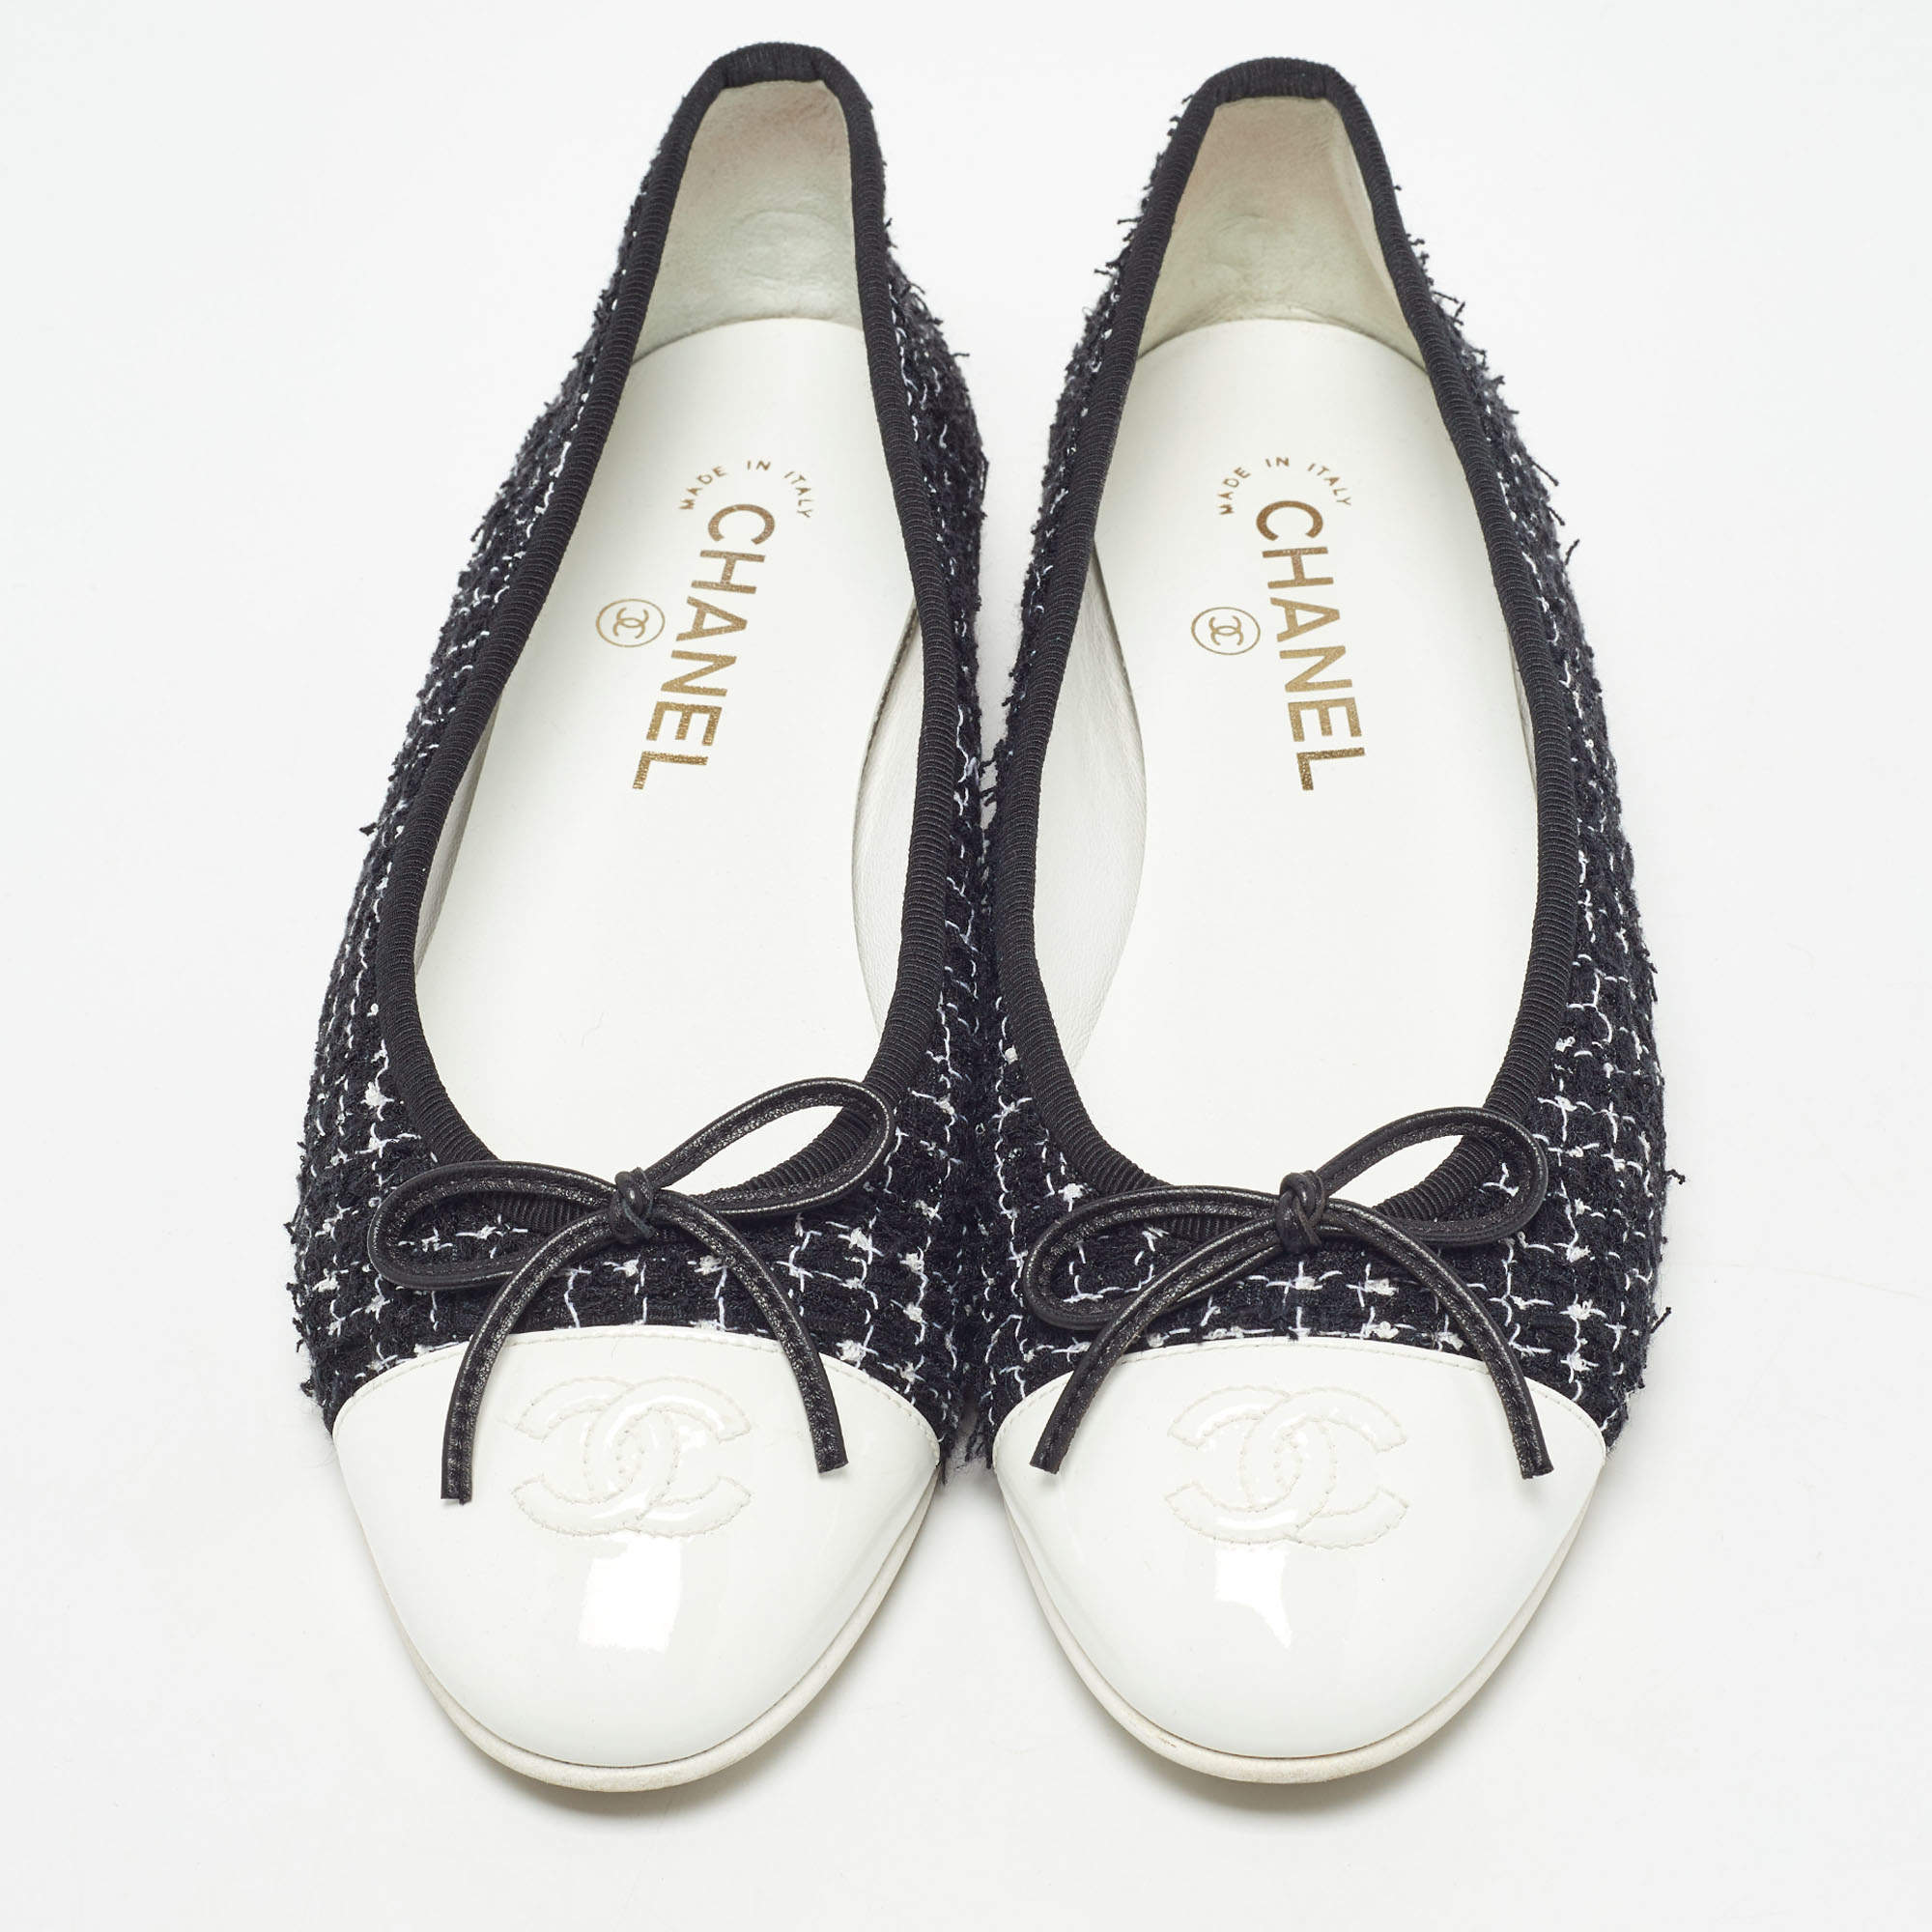 Chanel Black/White Tweed and Patent Leather CC Cap Toe Bow Ballet Flats  Size 38.5